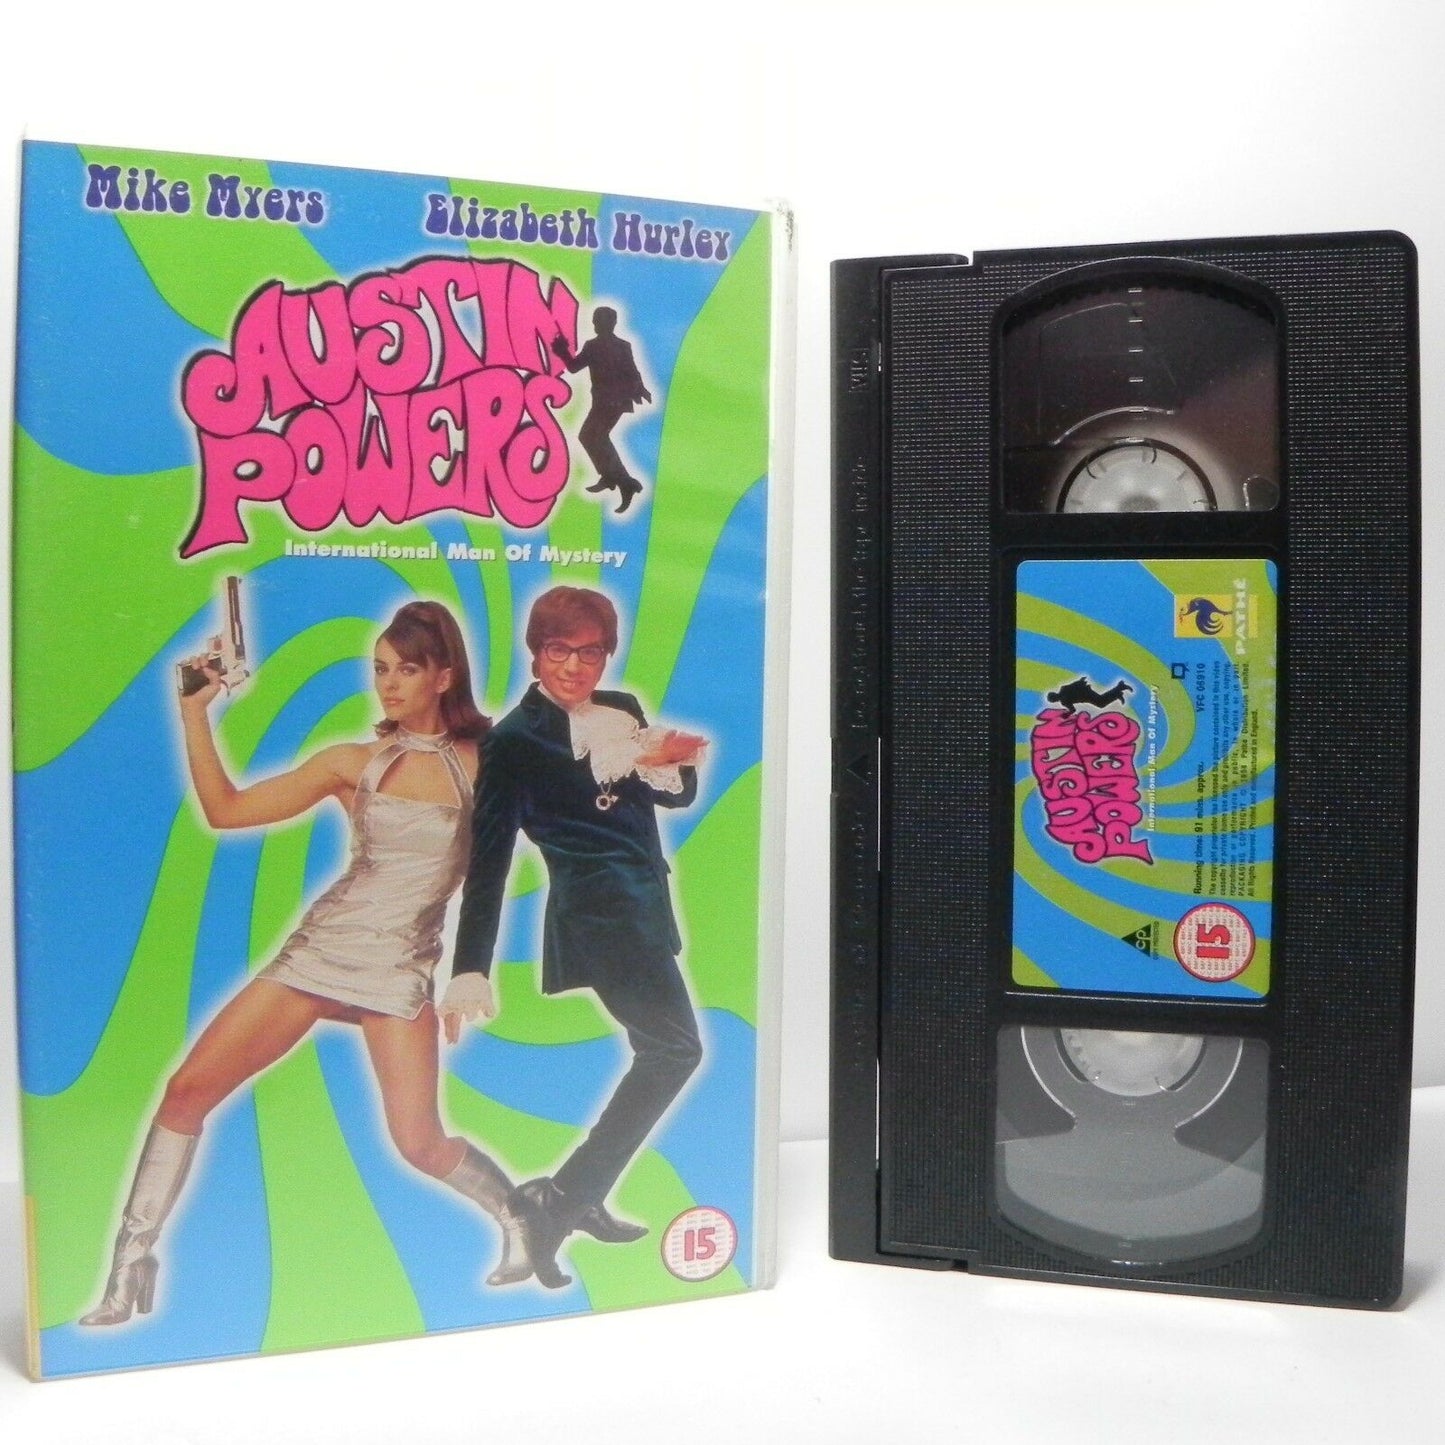 Austin Powers: Classic Comedy - (1999) Pathe - Mike Myers/Elizabeth Hurley - VHS-